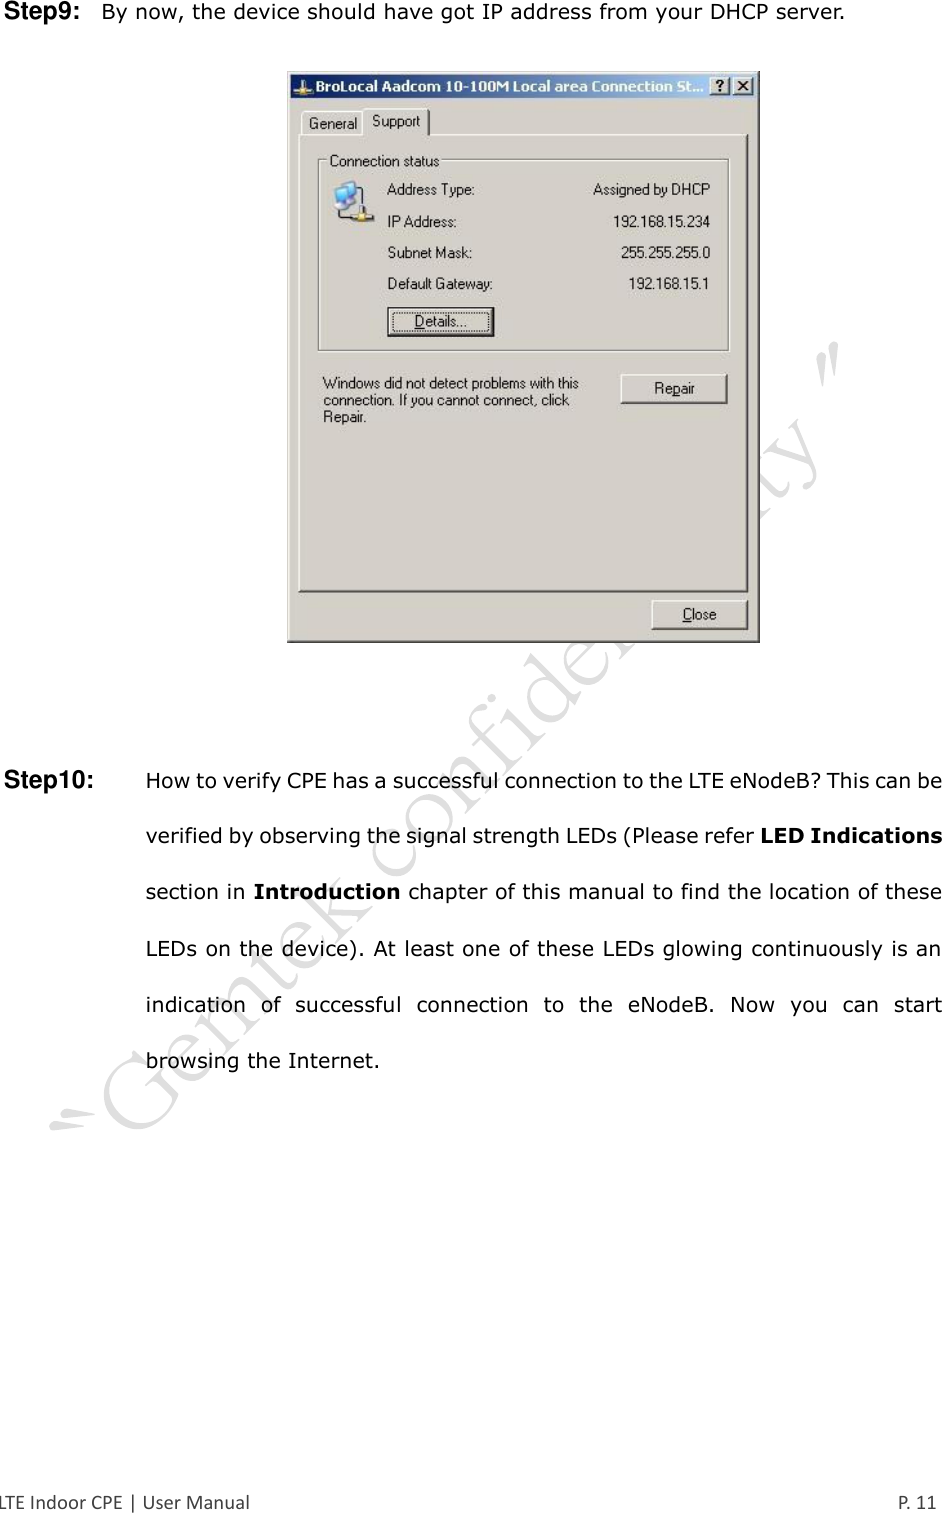  LTE Indoor CPE | User Manual      P. 11 Step9:   By now, the device should have got IP address from your DHCP server.     Step10:    How to verify CPE has a successful connection to the LTE eNodeB? This can be verified by observing the signal strength LEDs (Please refer LED Indications section in Introduction chapter of this manual to find the location of these LEDs on the device). At least one of these LEDs glowing continuously is an indication  of  successful  connection  to  the  eNodeB.  Now  you  can  start browsing the Internet.     